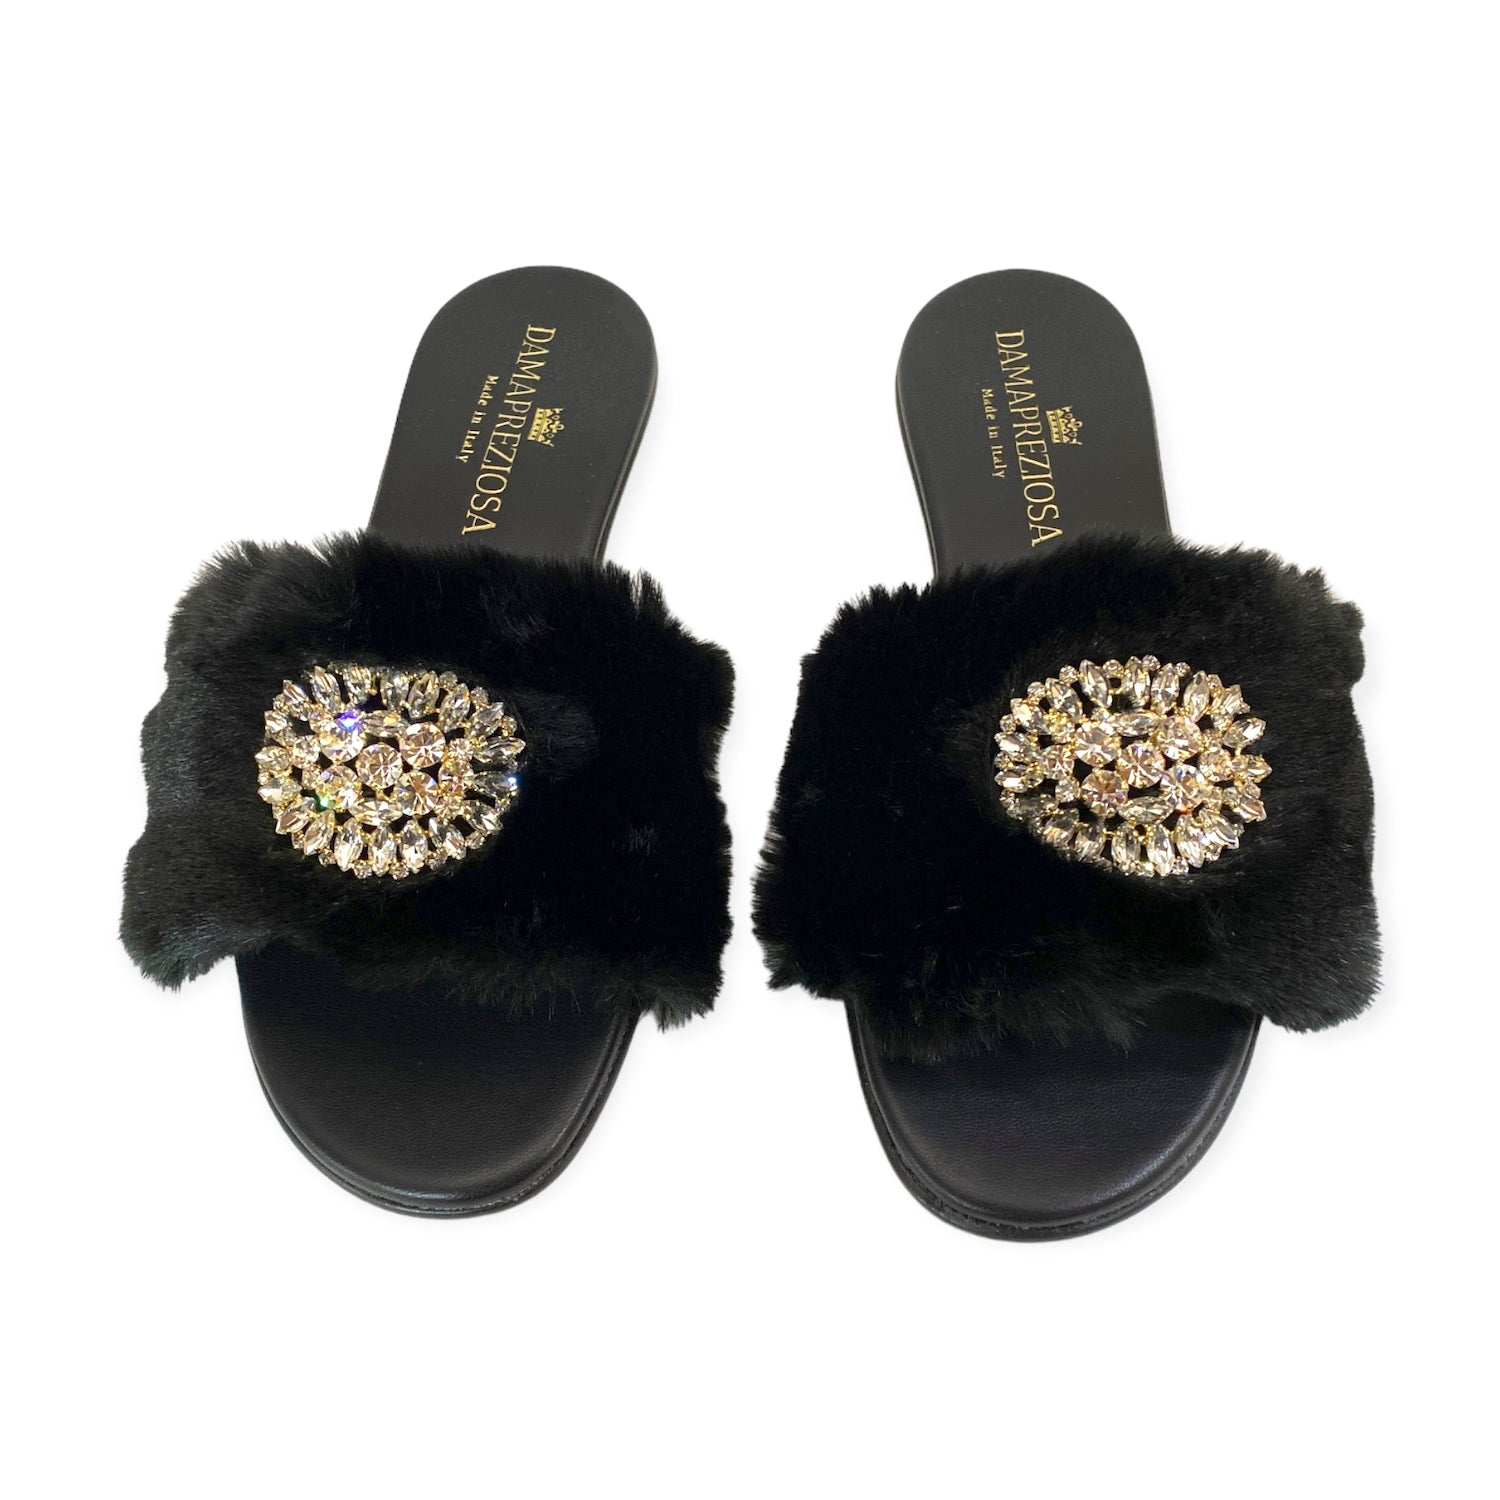 Made in Italy. Black vegan faux fur and vegan leather embellished with white crystals. Elegant padded insoles in soft black vegan leather to add the comfort you deserve. 2 cm. heel covered in black vegan leather.  Damapreziosa logo engraved on soles and insoles. Glittery sole.  PETA approved vegan product, made with non-leather materials following our cruelty-free ethics. Plastic-free, recycled paper boxes and packaging, and organic cotton dust bag.